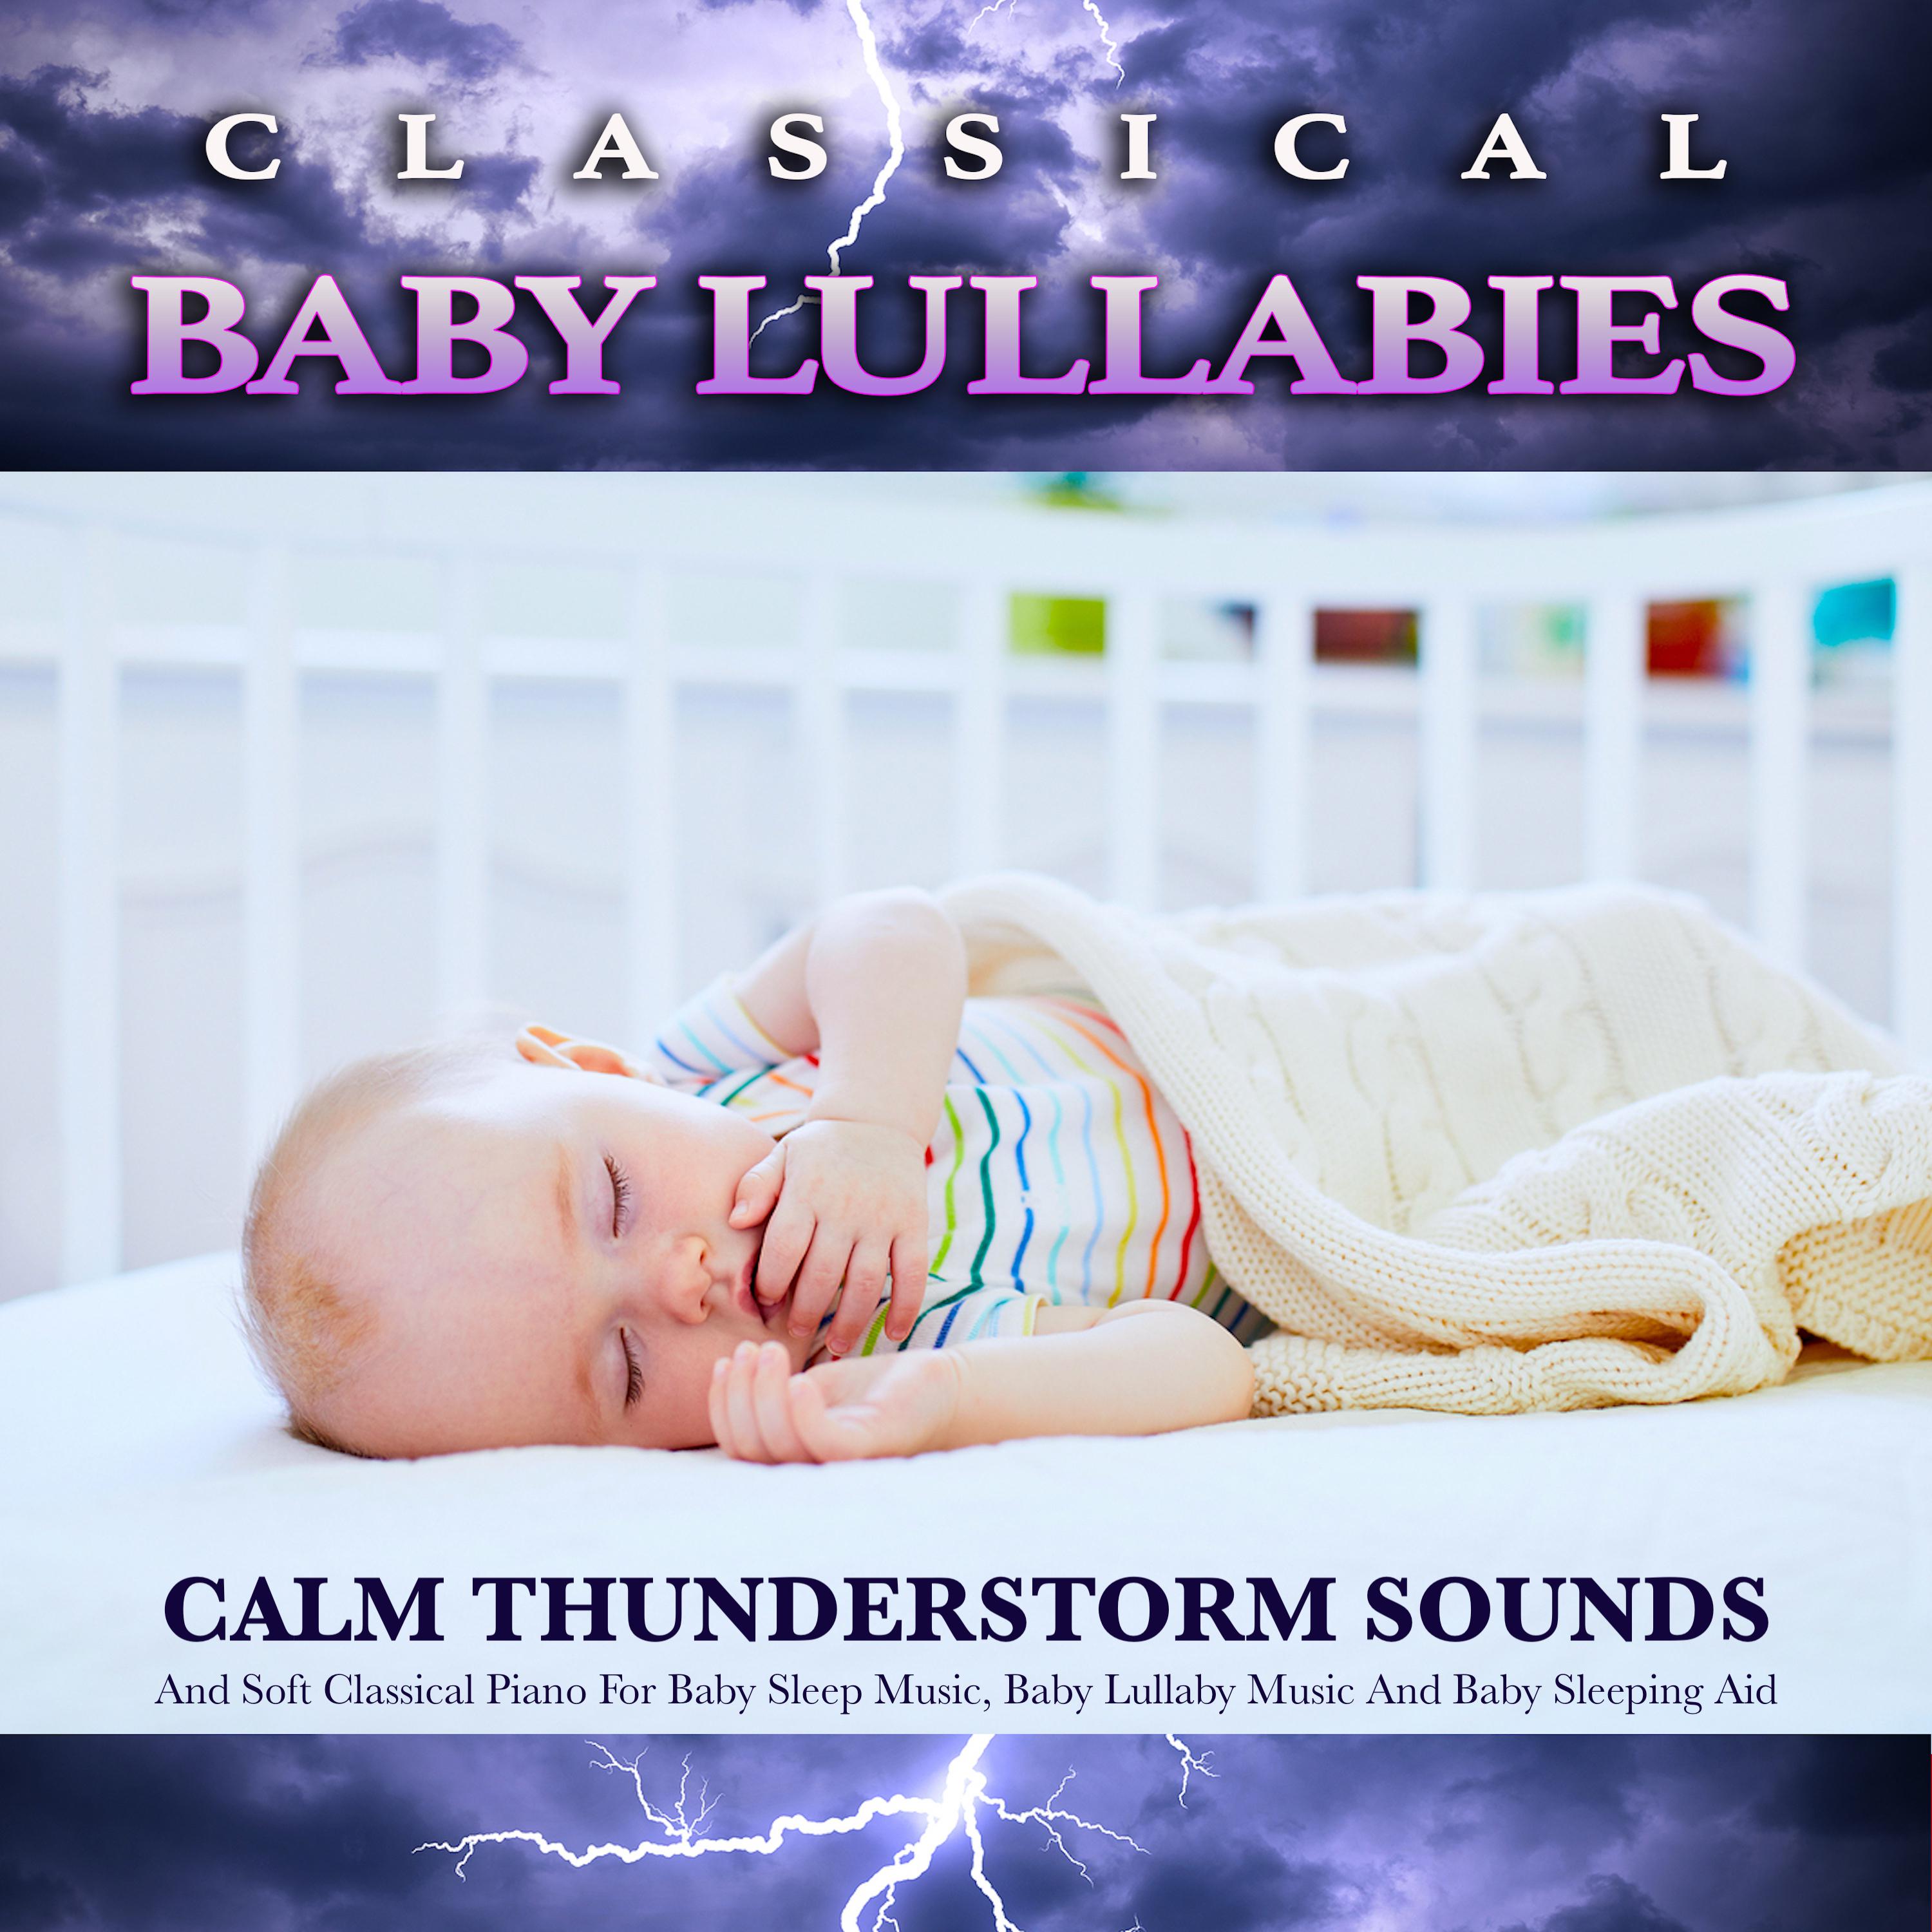 Air On A G String - Bach - Baby Lullaby - Baby Sleep Music - Classical Piano and Thunderstorm Sounds For Sleep